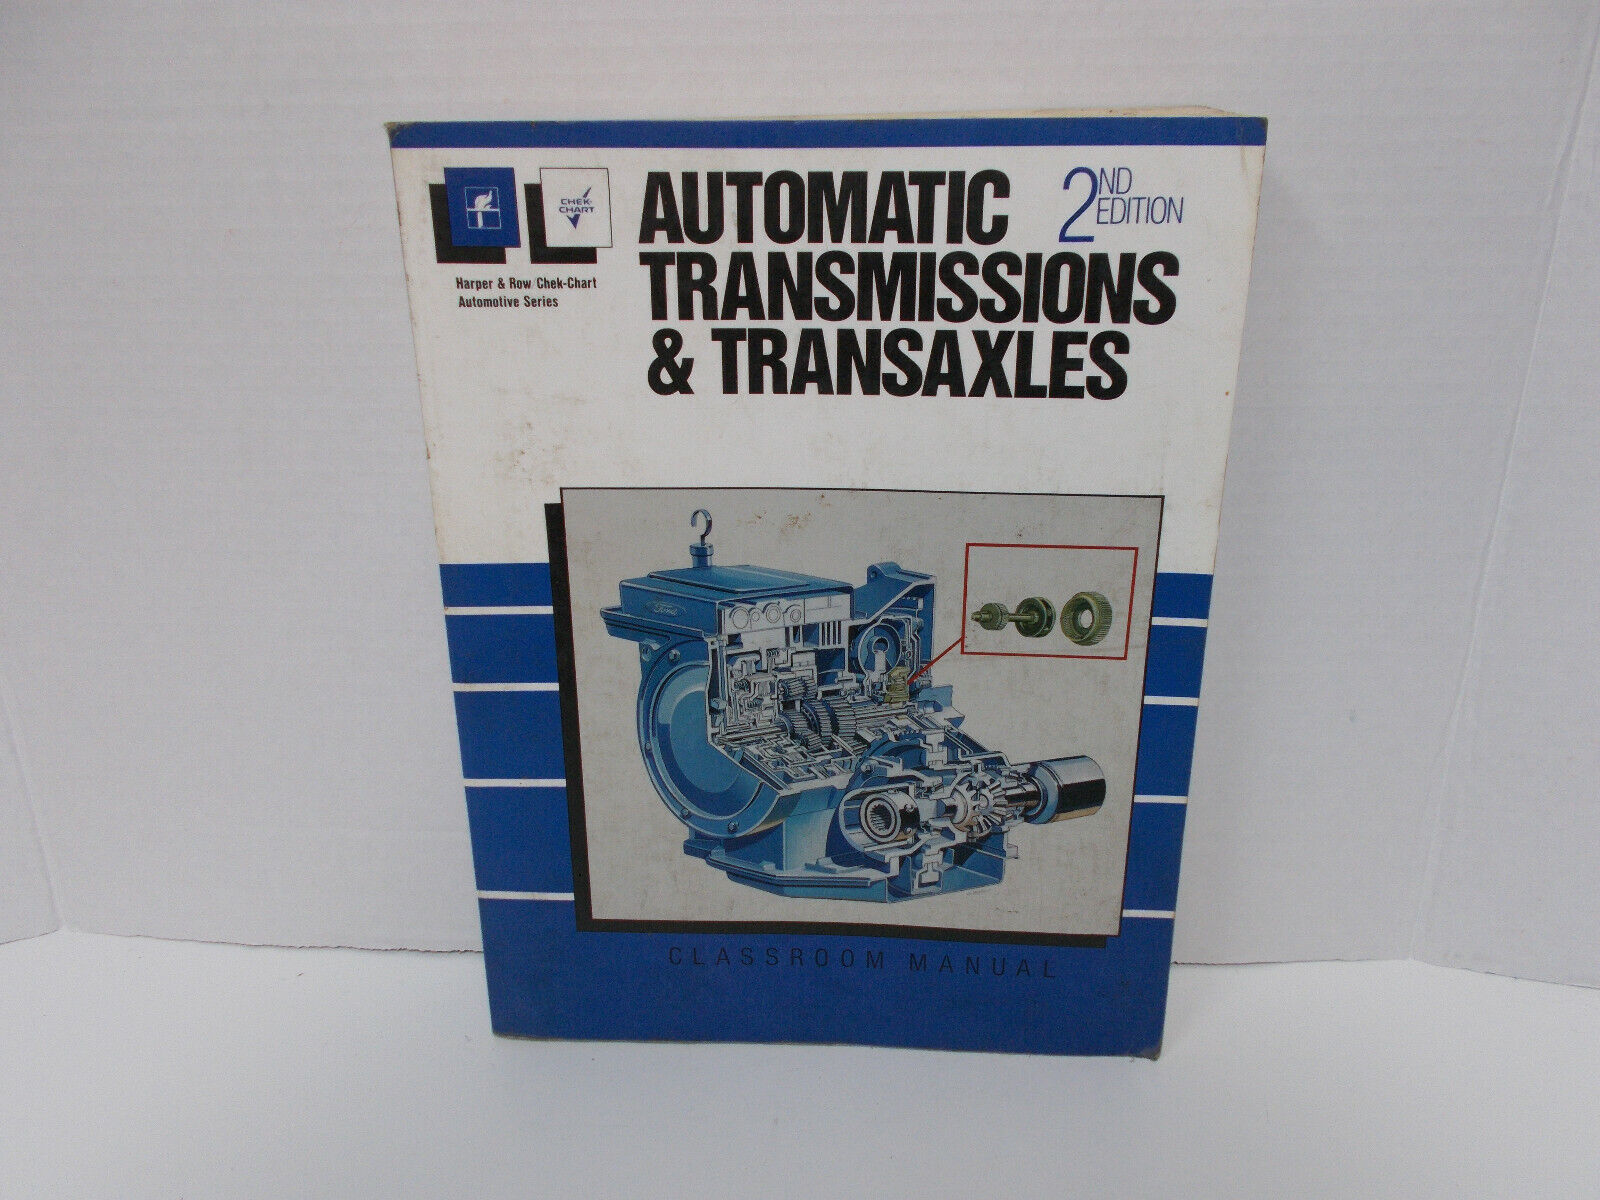 1989 AUTOMATIC TRANSMISSIONS & TRANSAXLES CLASSROOM MANUAL / 2ND ADDITION